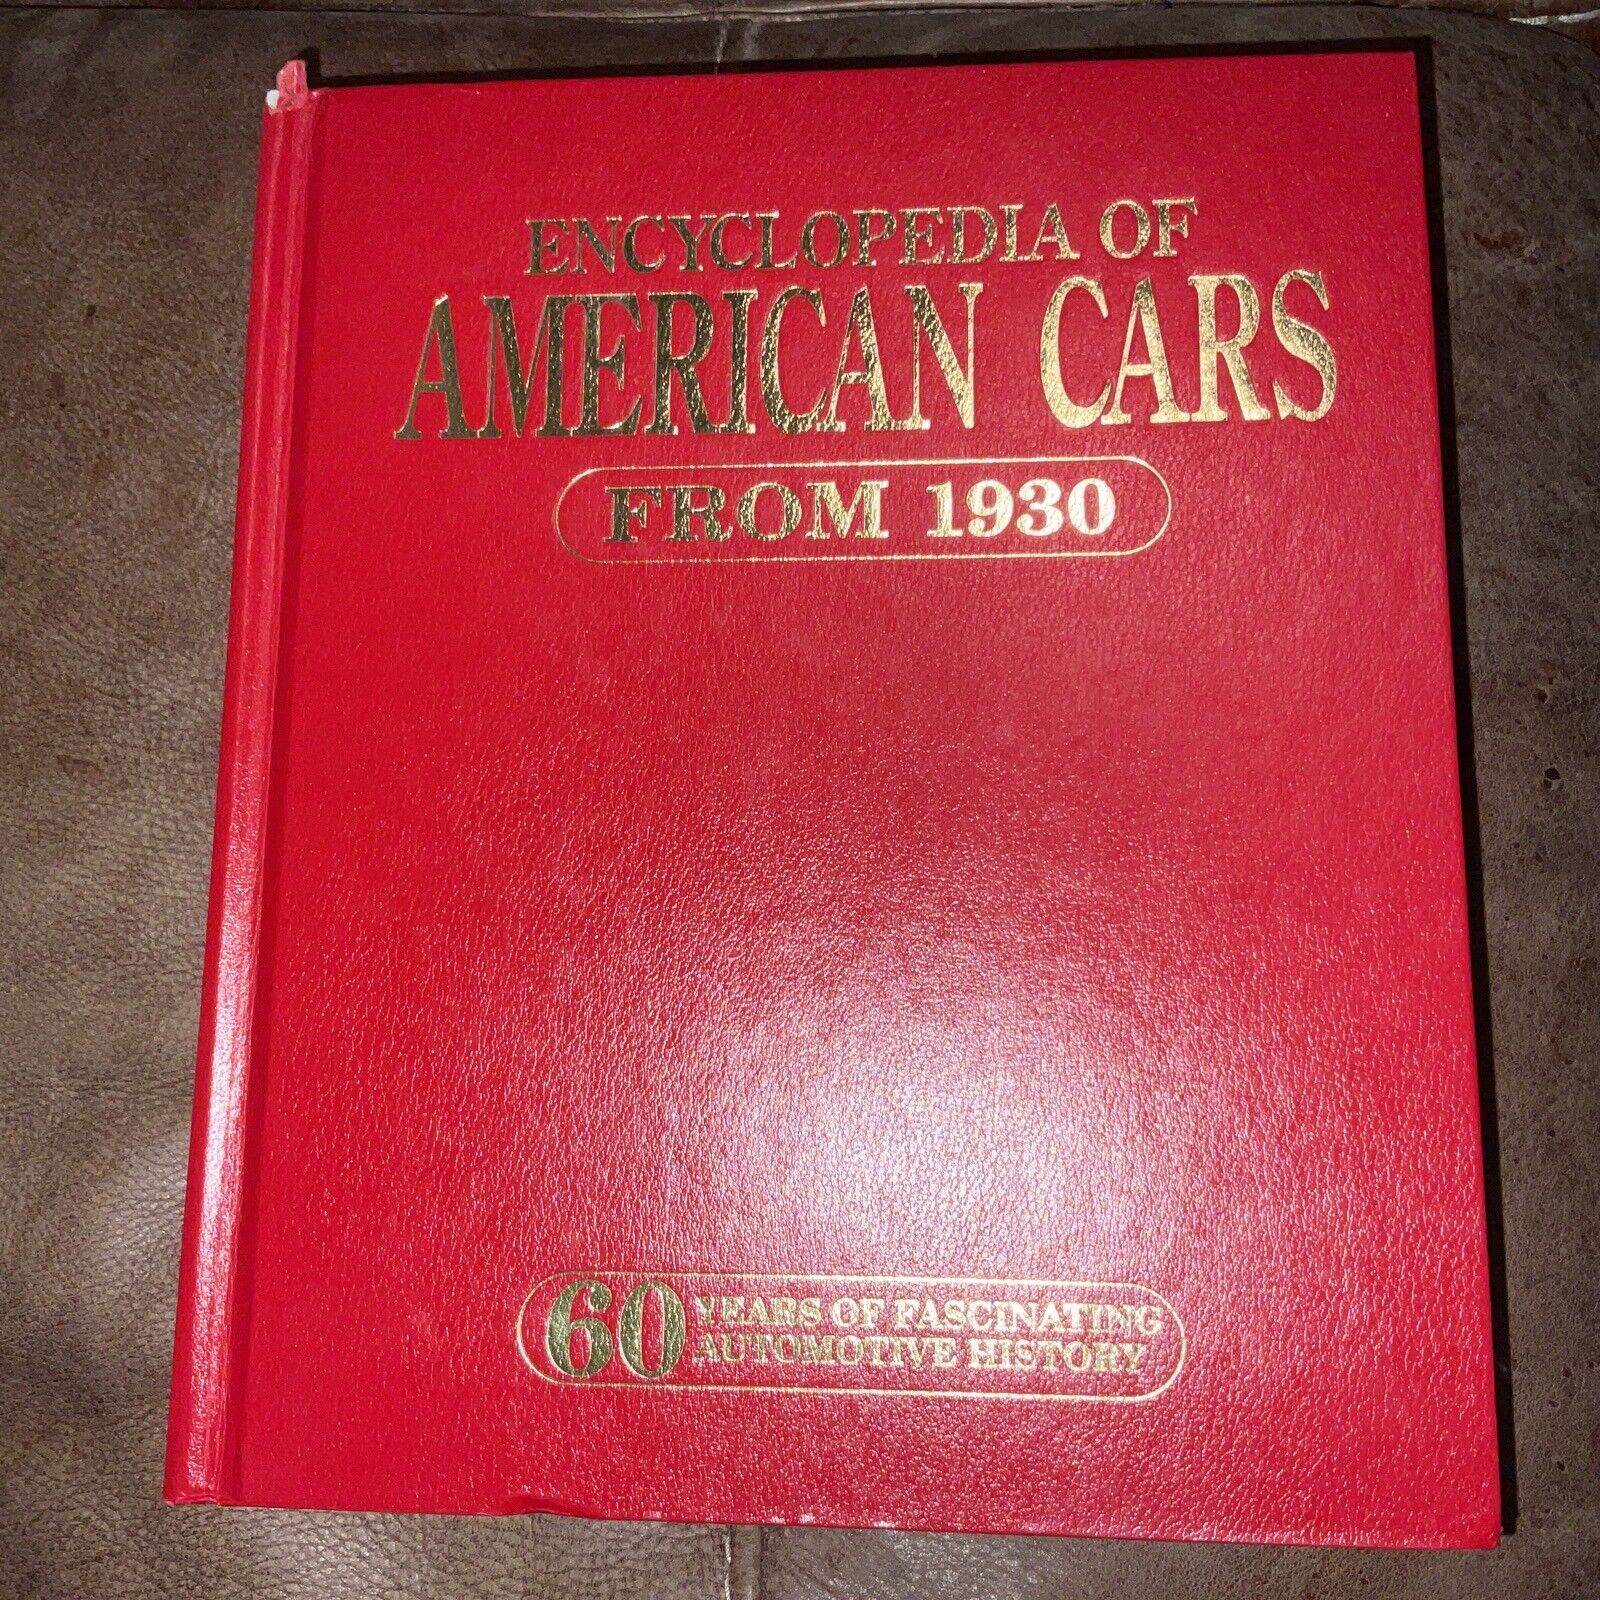 ENCYCLOPEDIA OF AMERICAN CARS FROM 1930-HARDCOVER 816 PGS. GREAT PICS